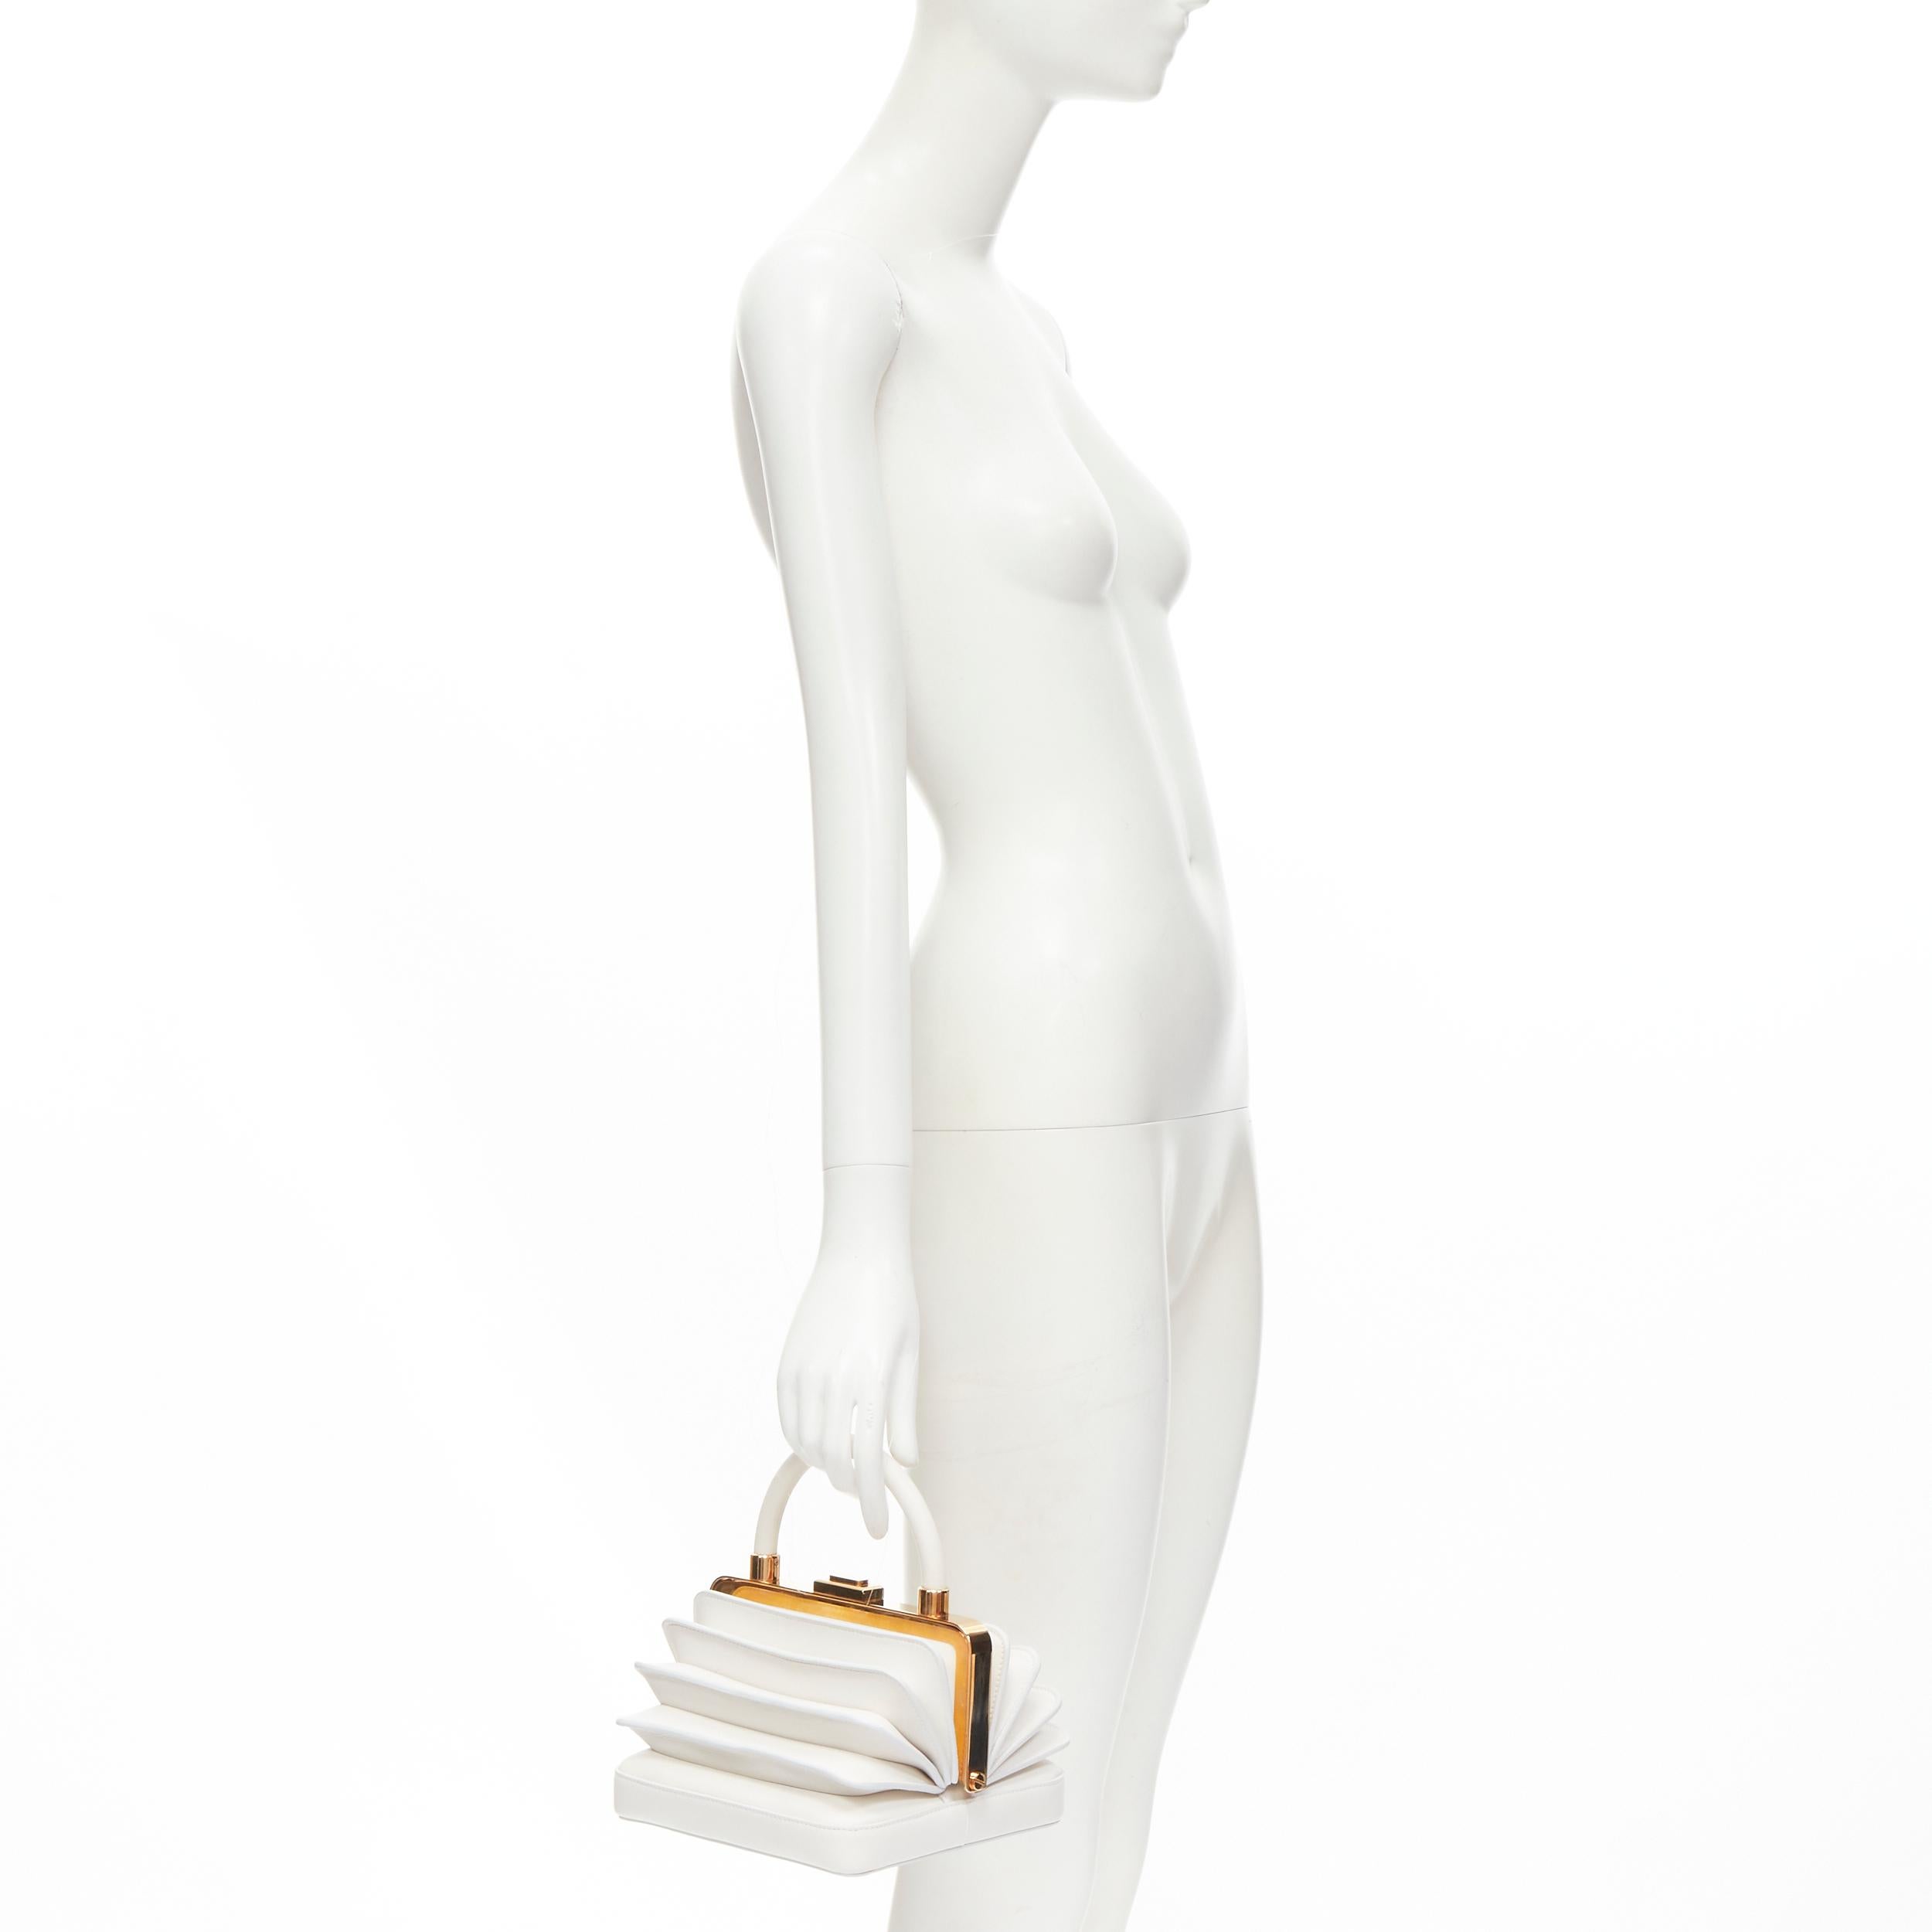 GABRIELA HEARST Diana white nappa leather rose gold accordion bag 
Reference: LNKO/A01923 
Brand: Gabriela Hearst 
Model: Diana bag 
Material: Leather 
Color: White 
Pattern: Solid 
Closure: Push Clasp 
Extra Detail: Signature Diana bag. White